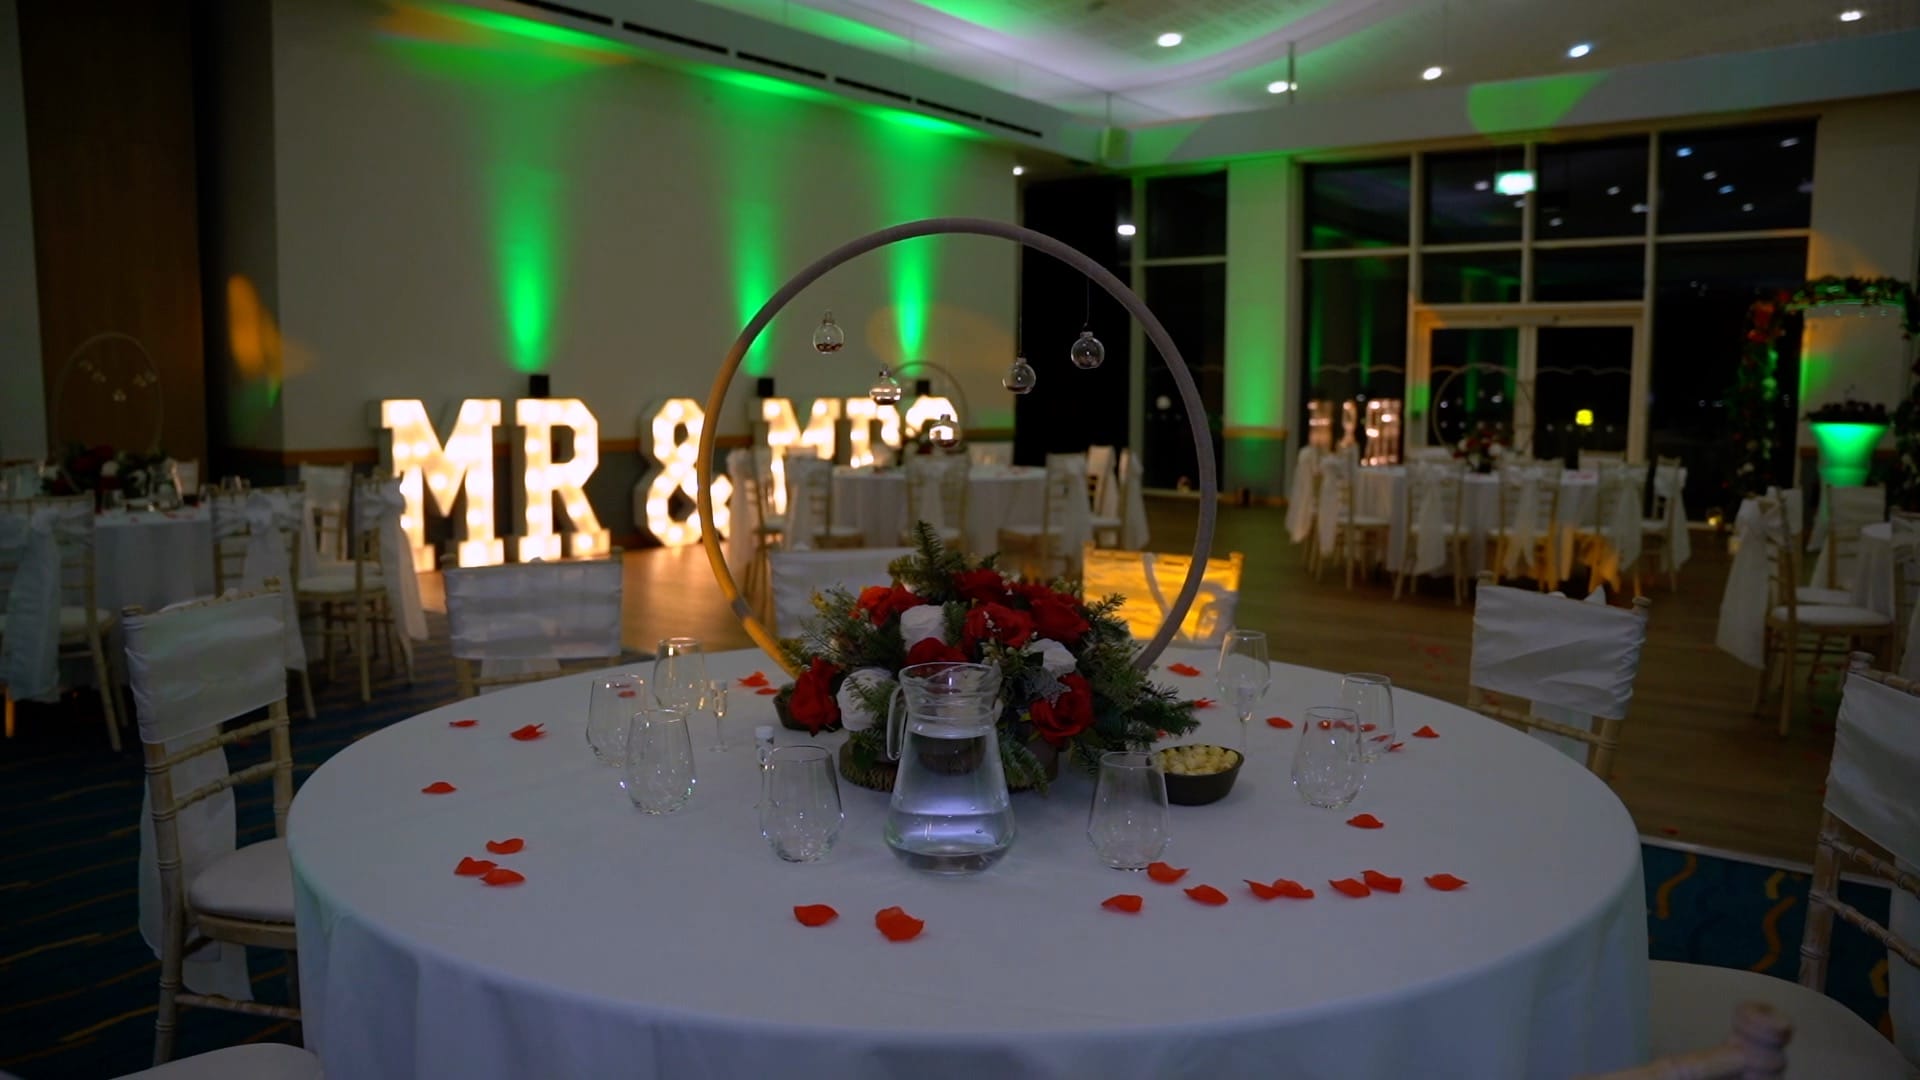 Conference Suite set for a wedding with green uplighters and large MR and MRS neon letters.